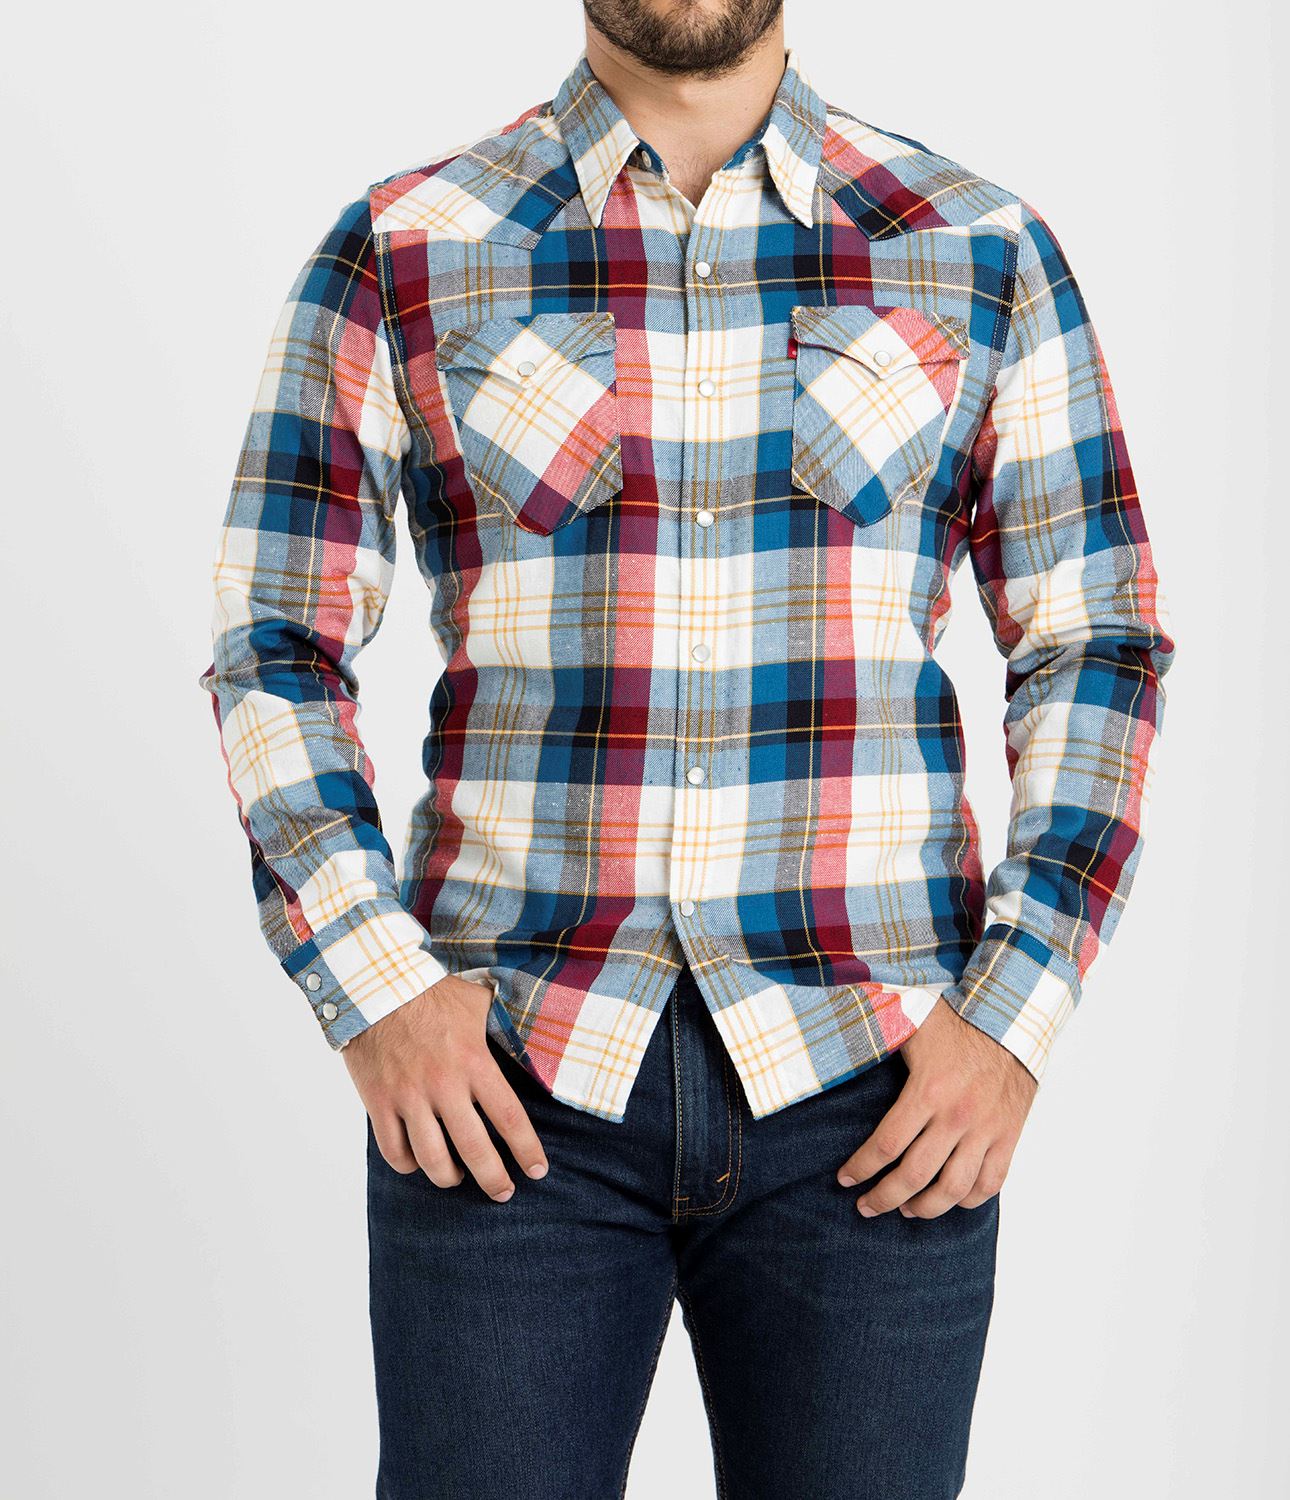 Camisa Cuadros Levis Hombre Clearance, SAVE aabs.org